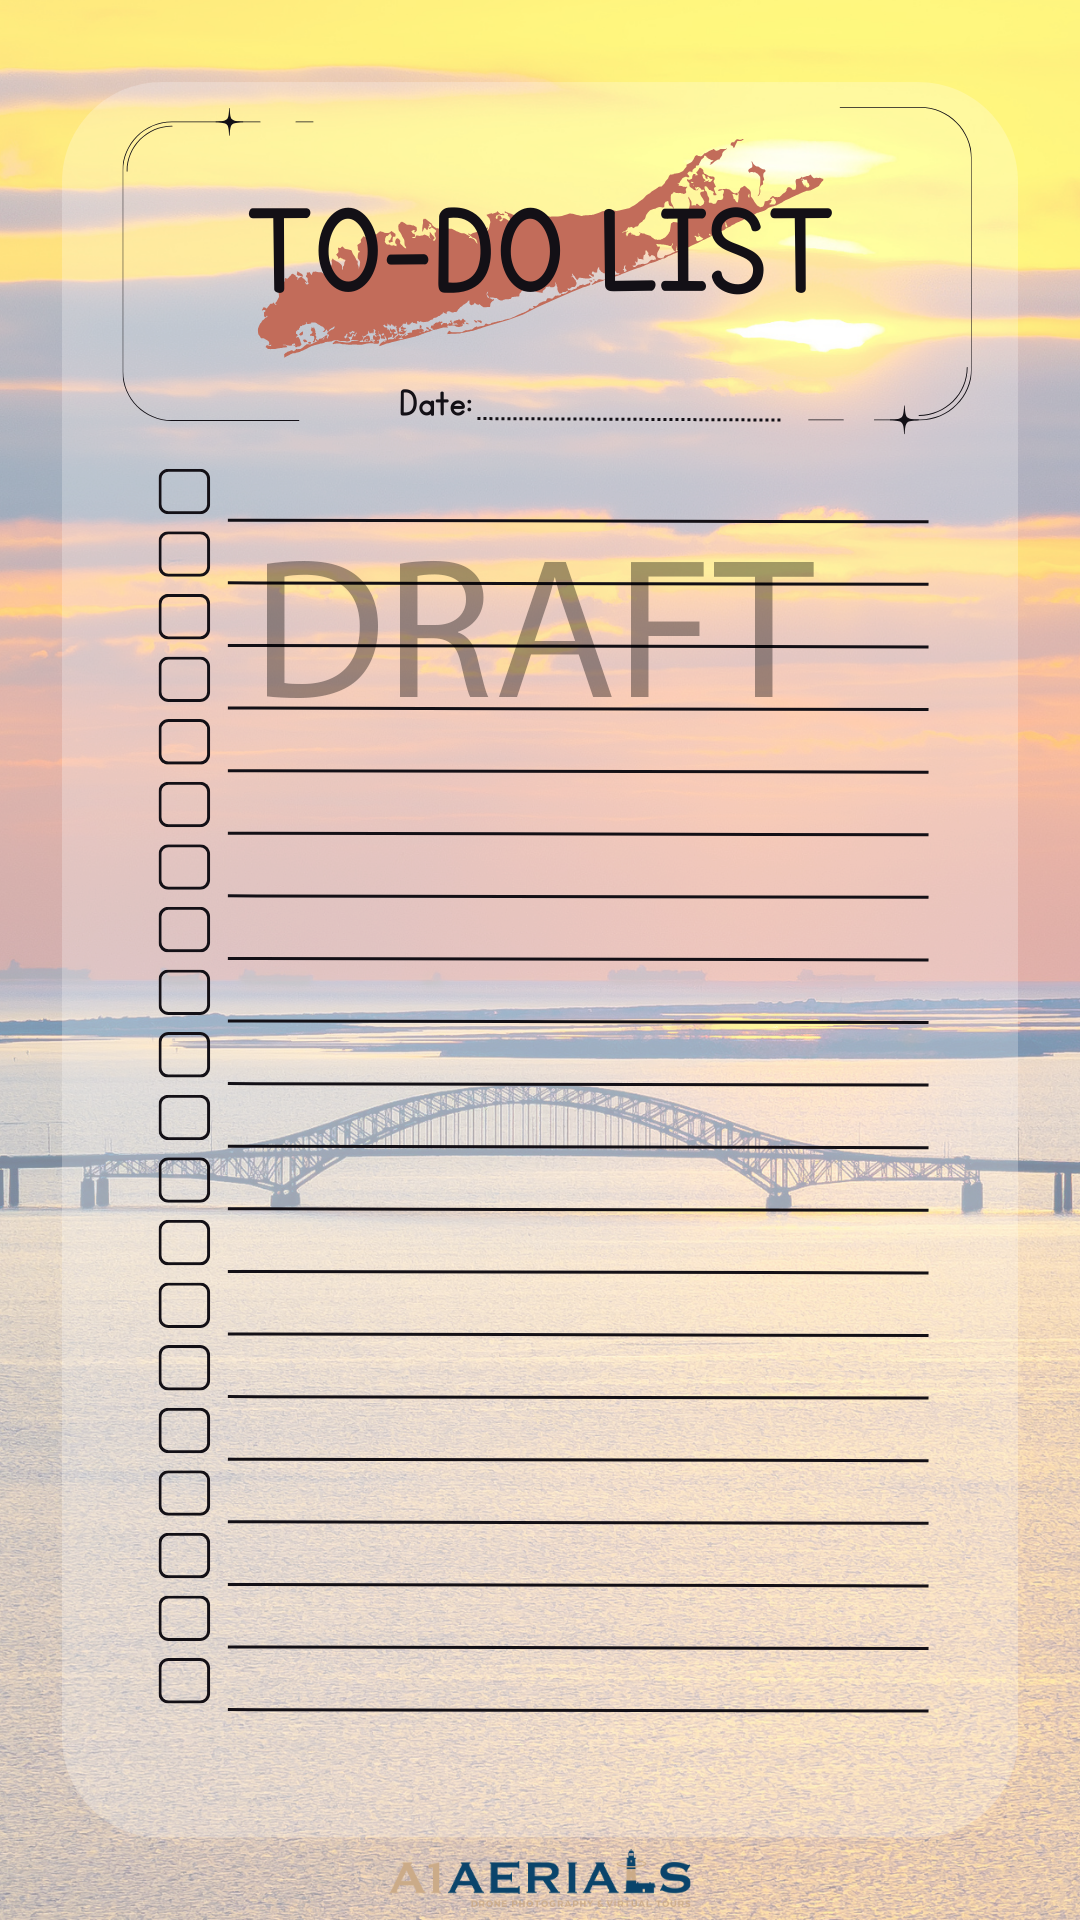 Simple To-Do List (Instant Download) - Great South Bay Bridge